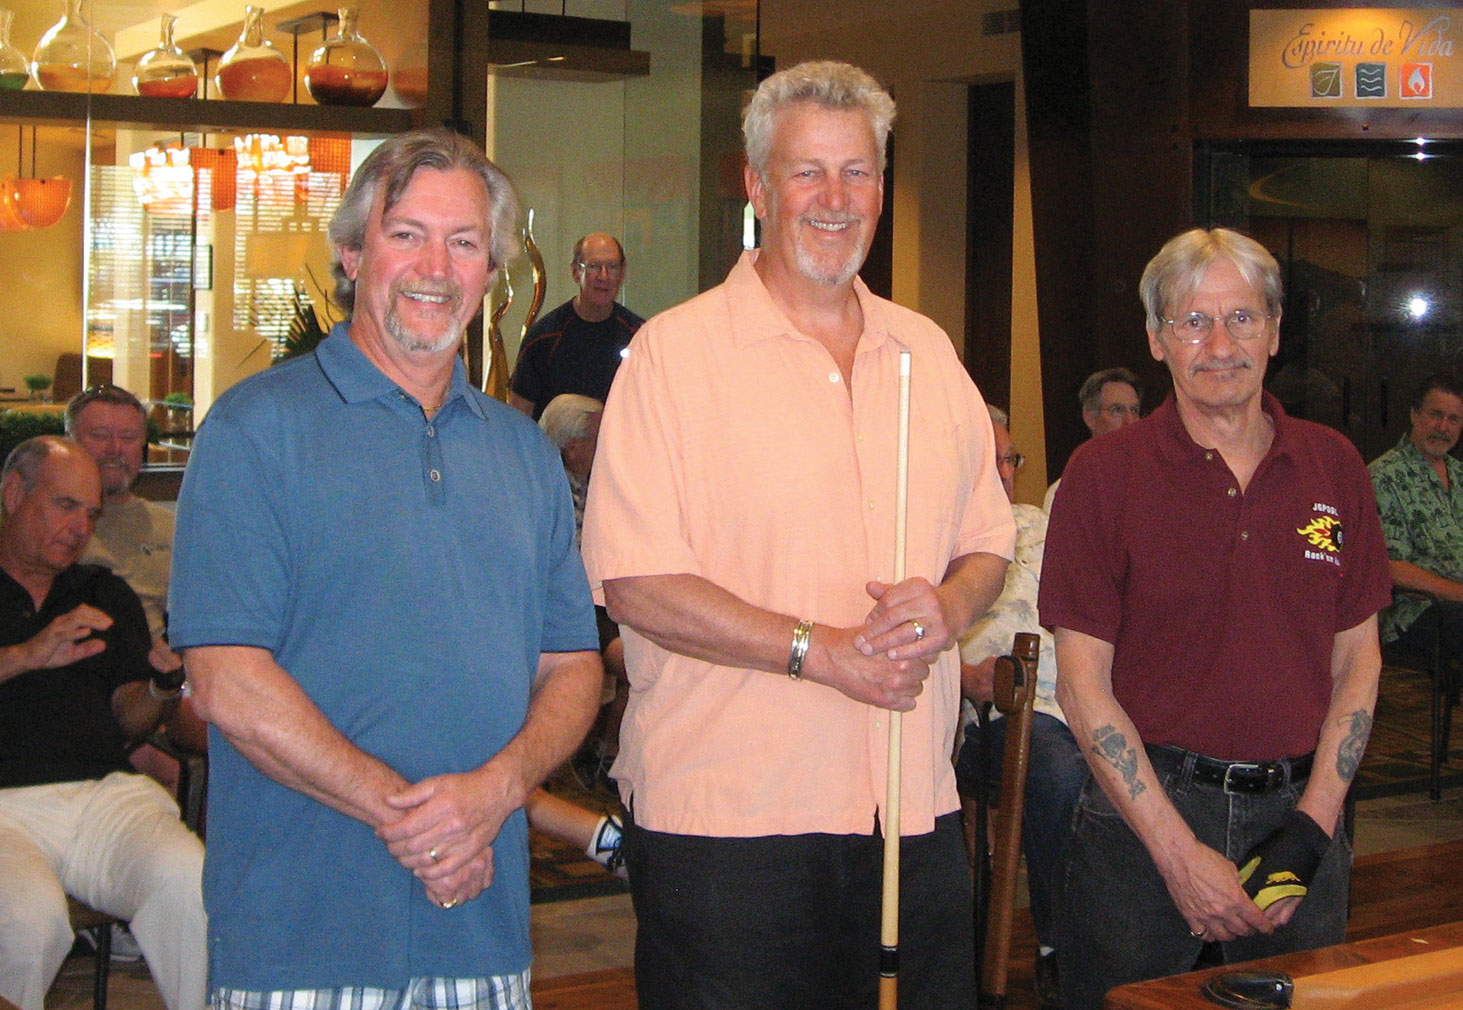 Dominic Borland (TD), Jay Clary, winner of the cue/case from Linsay’s Quality Cues, Joe Giammarino (TD)